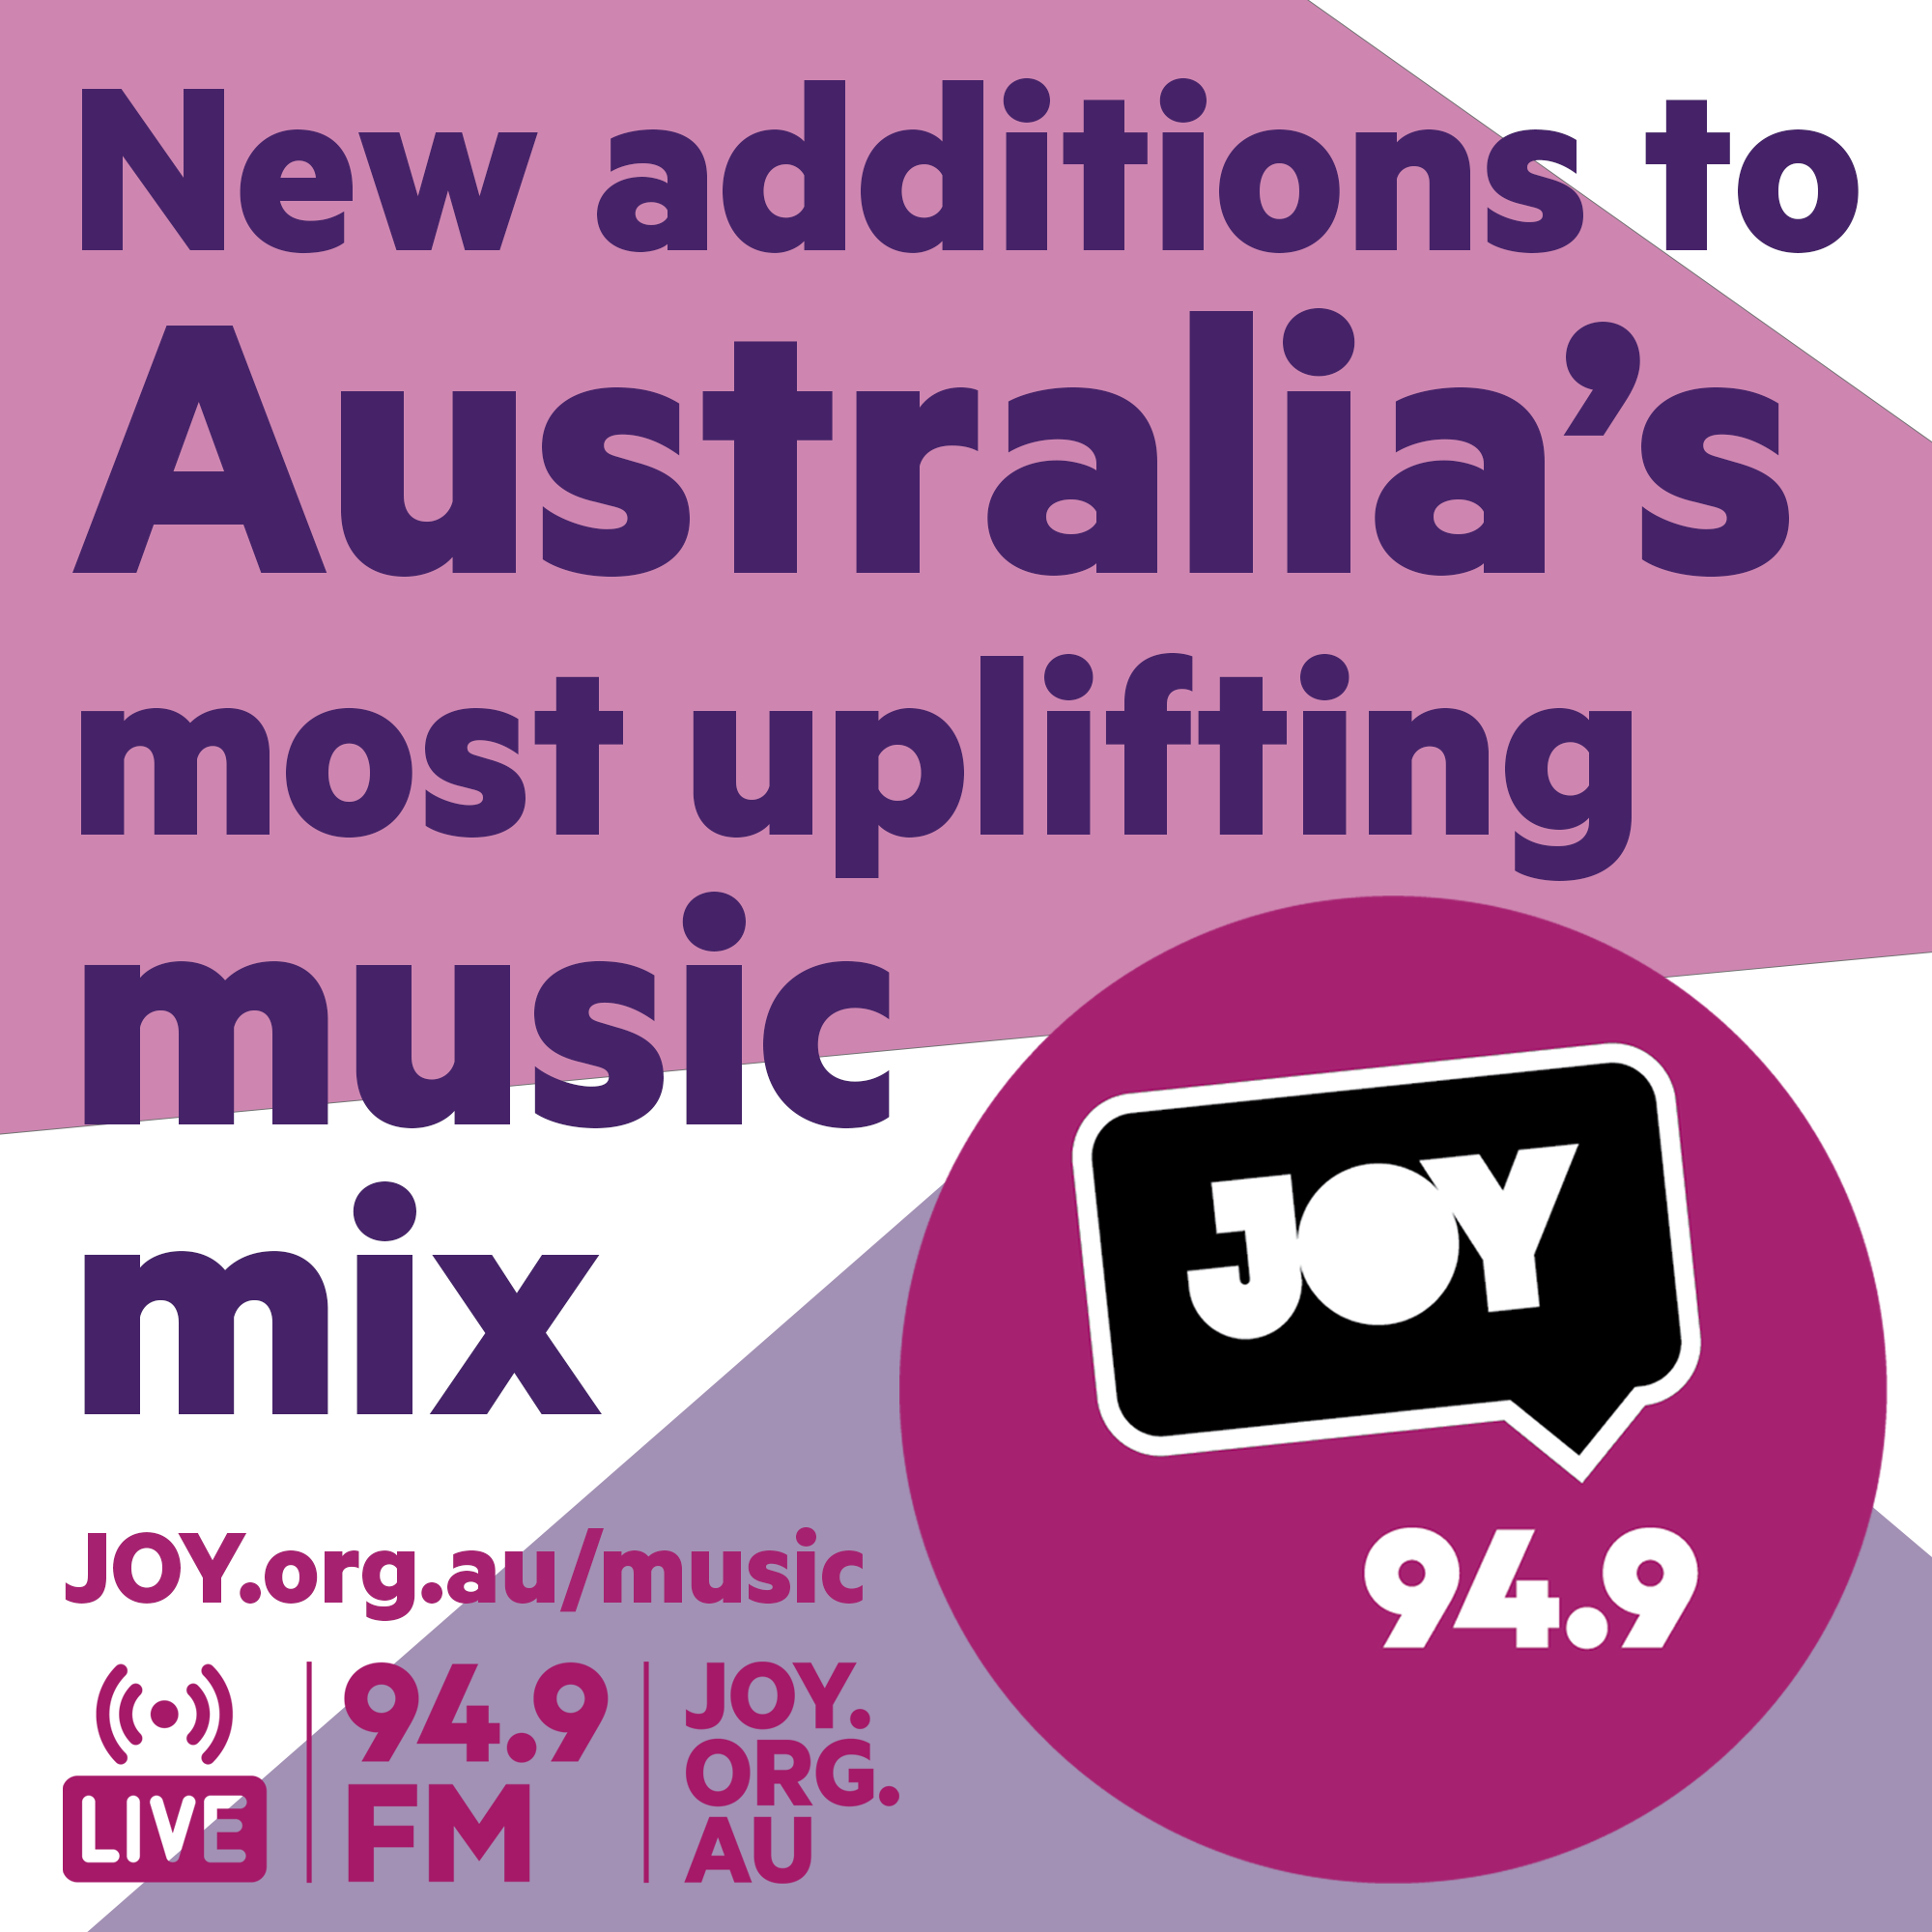 The newest songs to Australia’s most uplifting music mix: 27 April 2022